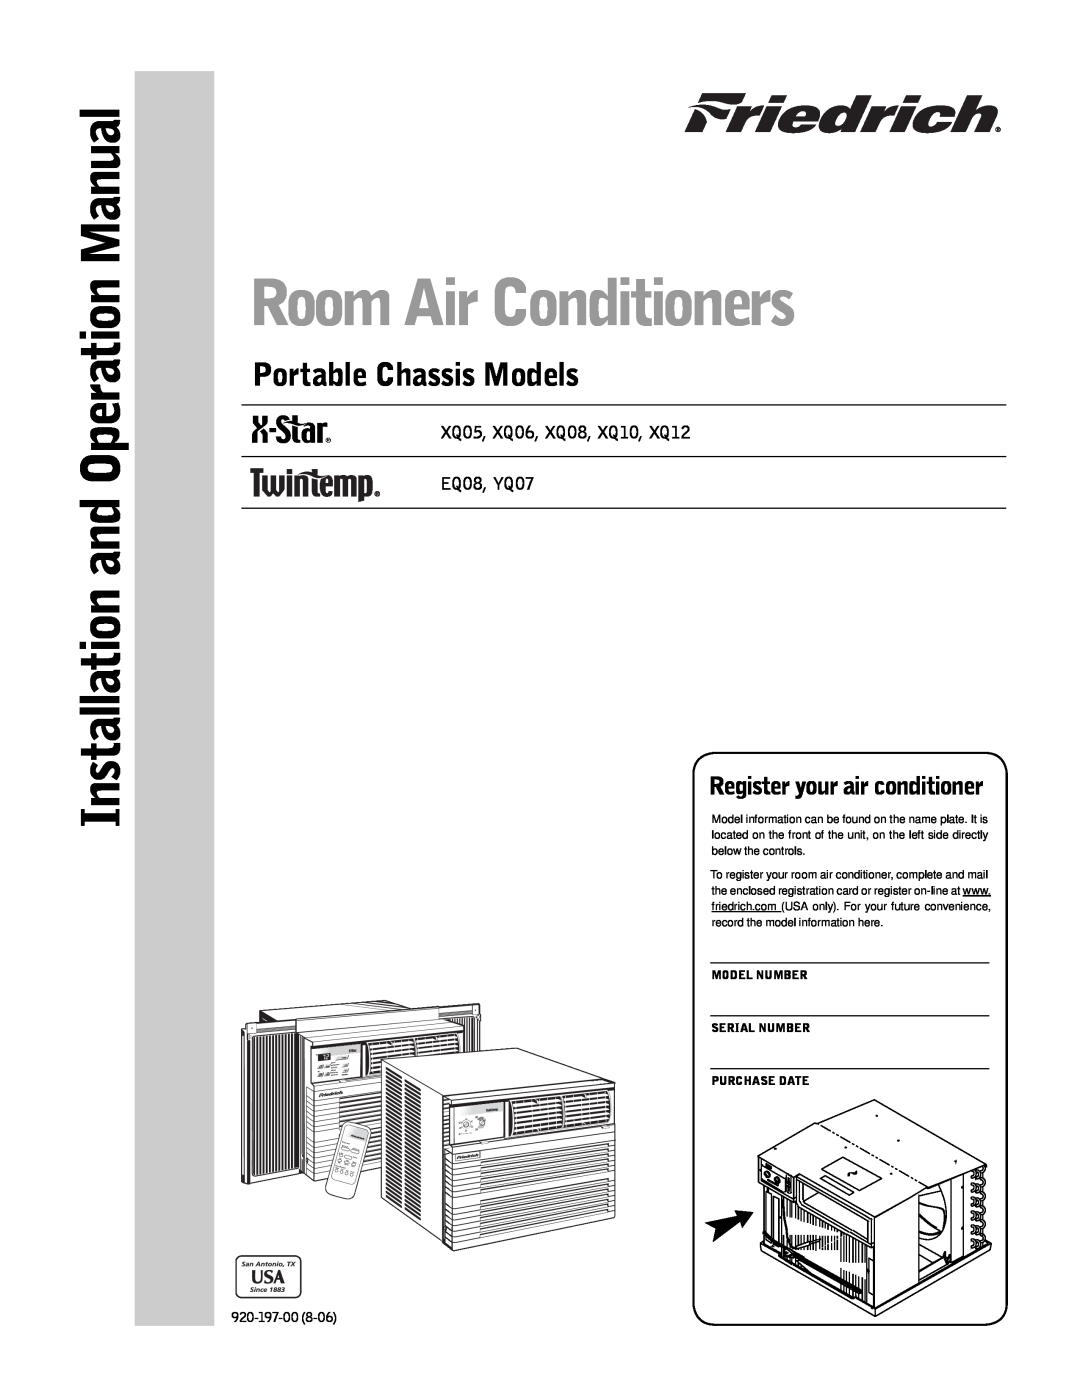 Friedrich EQ08 operation manual Room Air Conditioners, Portable Chassis Models, Register your air conditioner, 920-197-01 